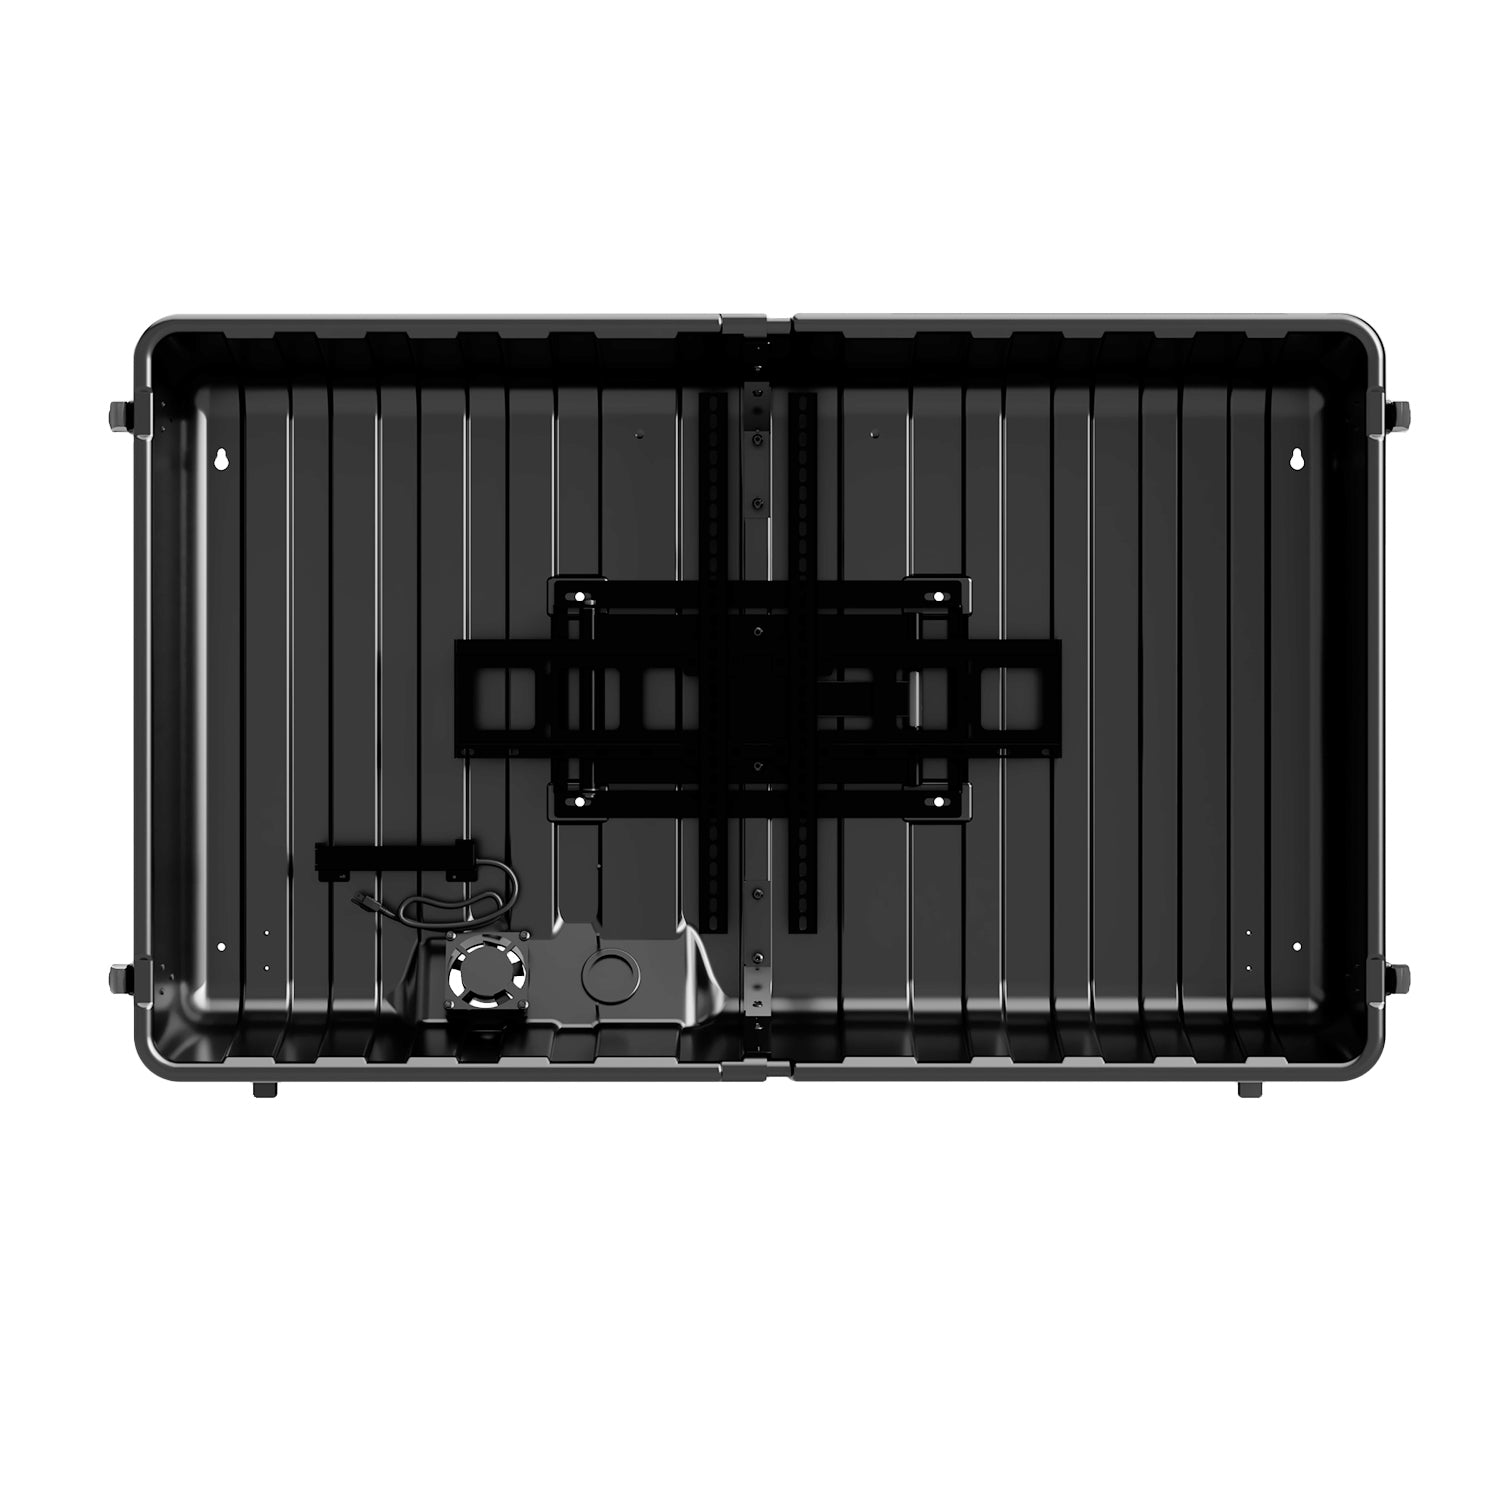 Storm Shell Outdoor Weatherproof TV Enclosure with ariticulating arm and mounting hardware. Fits up to 55" TV straight on view, with cover removed